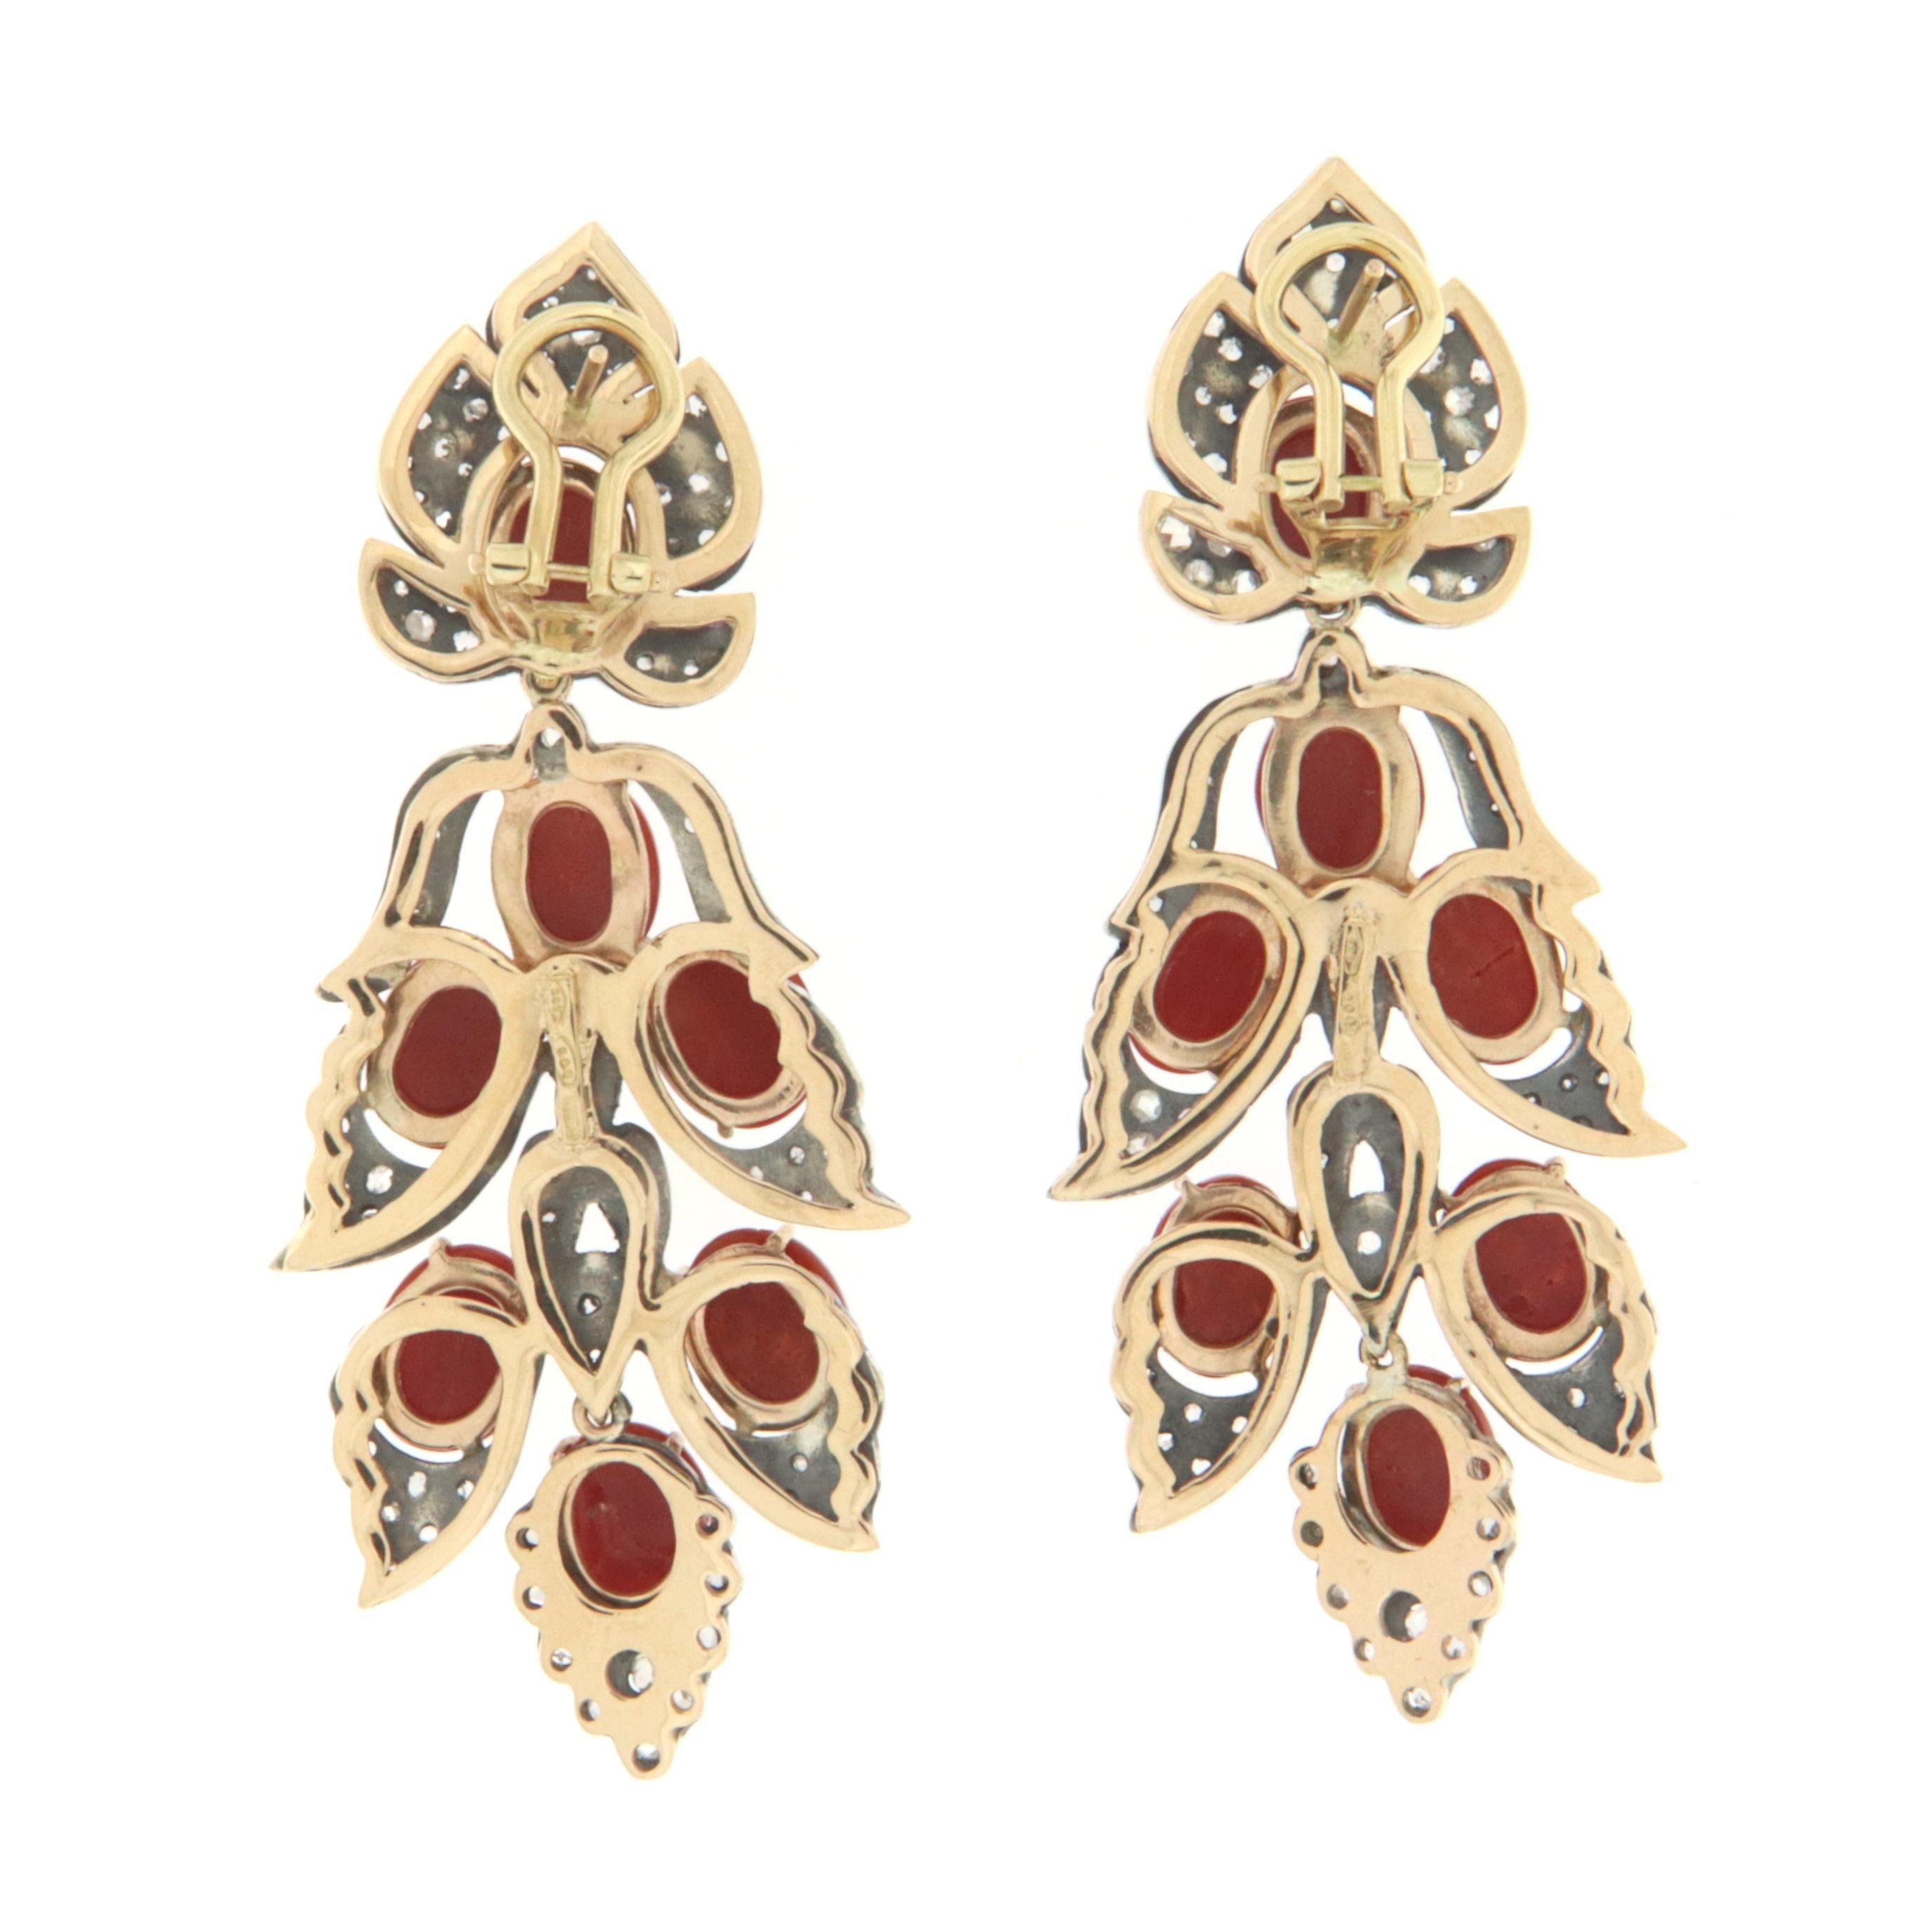 Amazing earrings in 14 karat yellow gold and 800 thousandths silver, 1950s style, Italian manufacture, mounted with old cut diamonds and Sardinian coral

Diamonds weight 1.93 karat
Coral weight 6 grams
Earrings total weight 33.30 grams